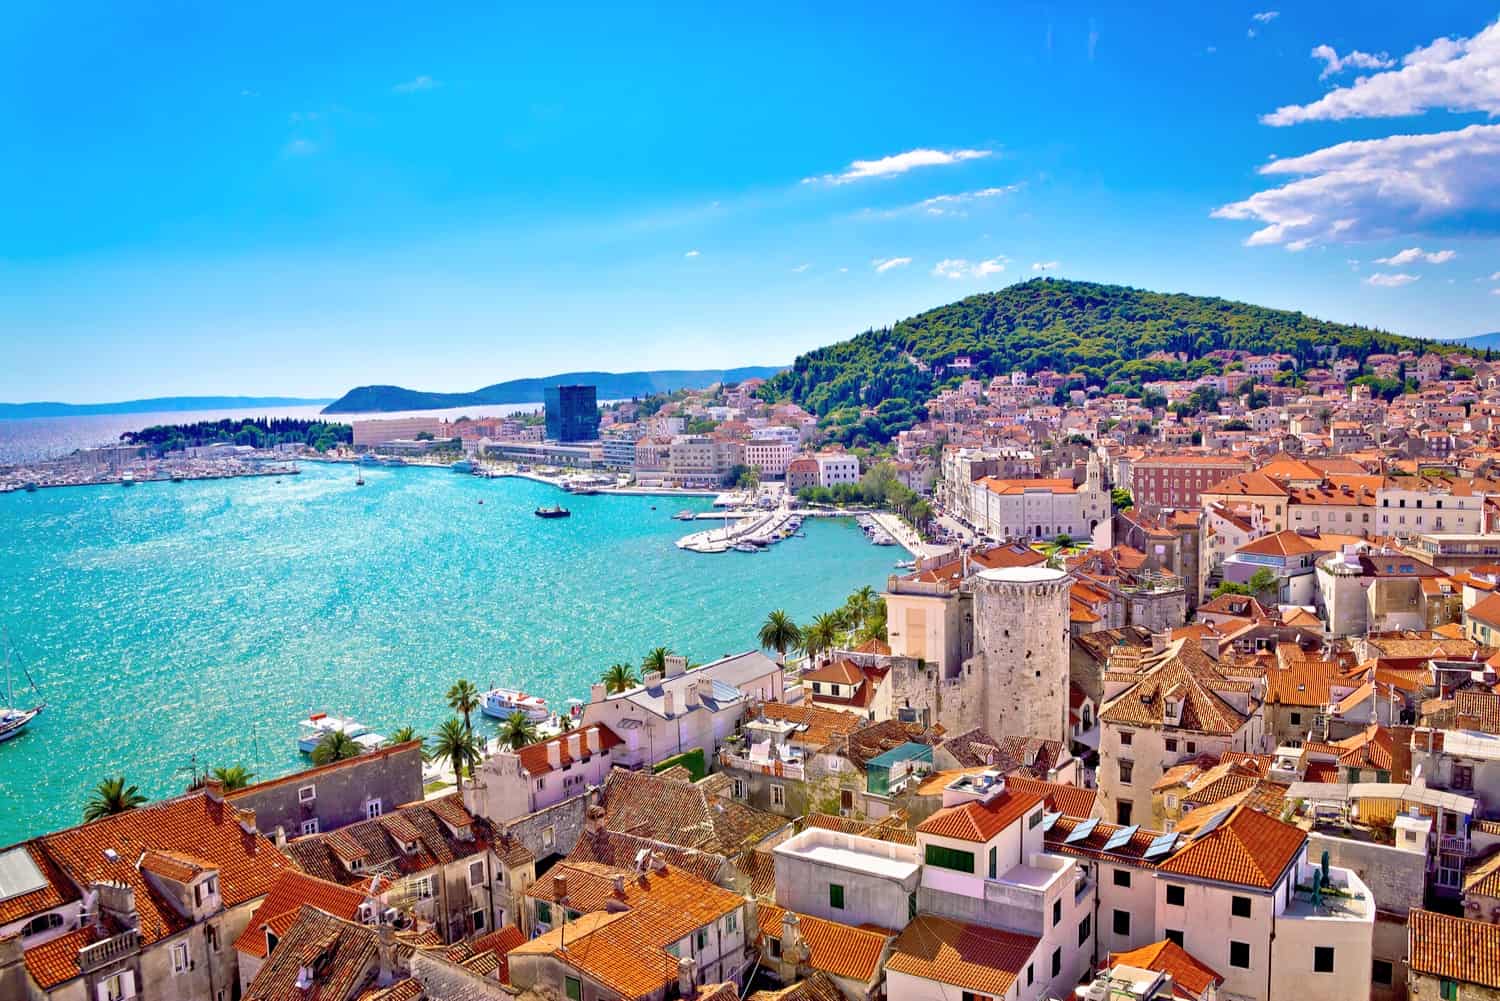 Waterfront in Split, Croatia, with many red-roofed houses and other buildings clustered closely around a small harbour.